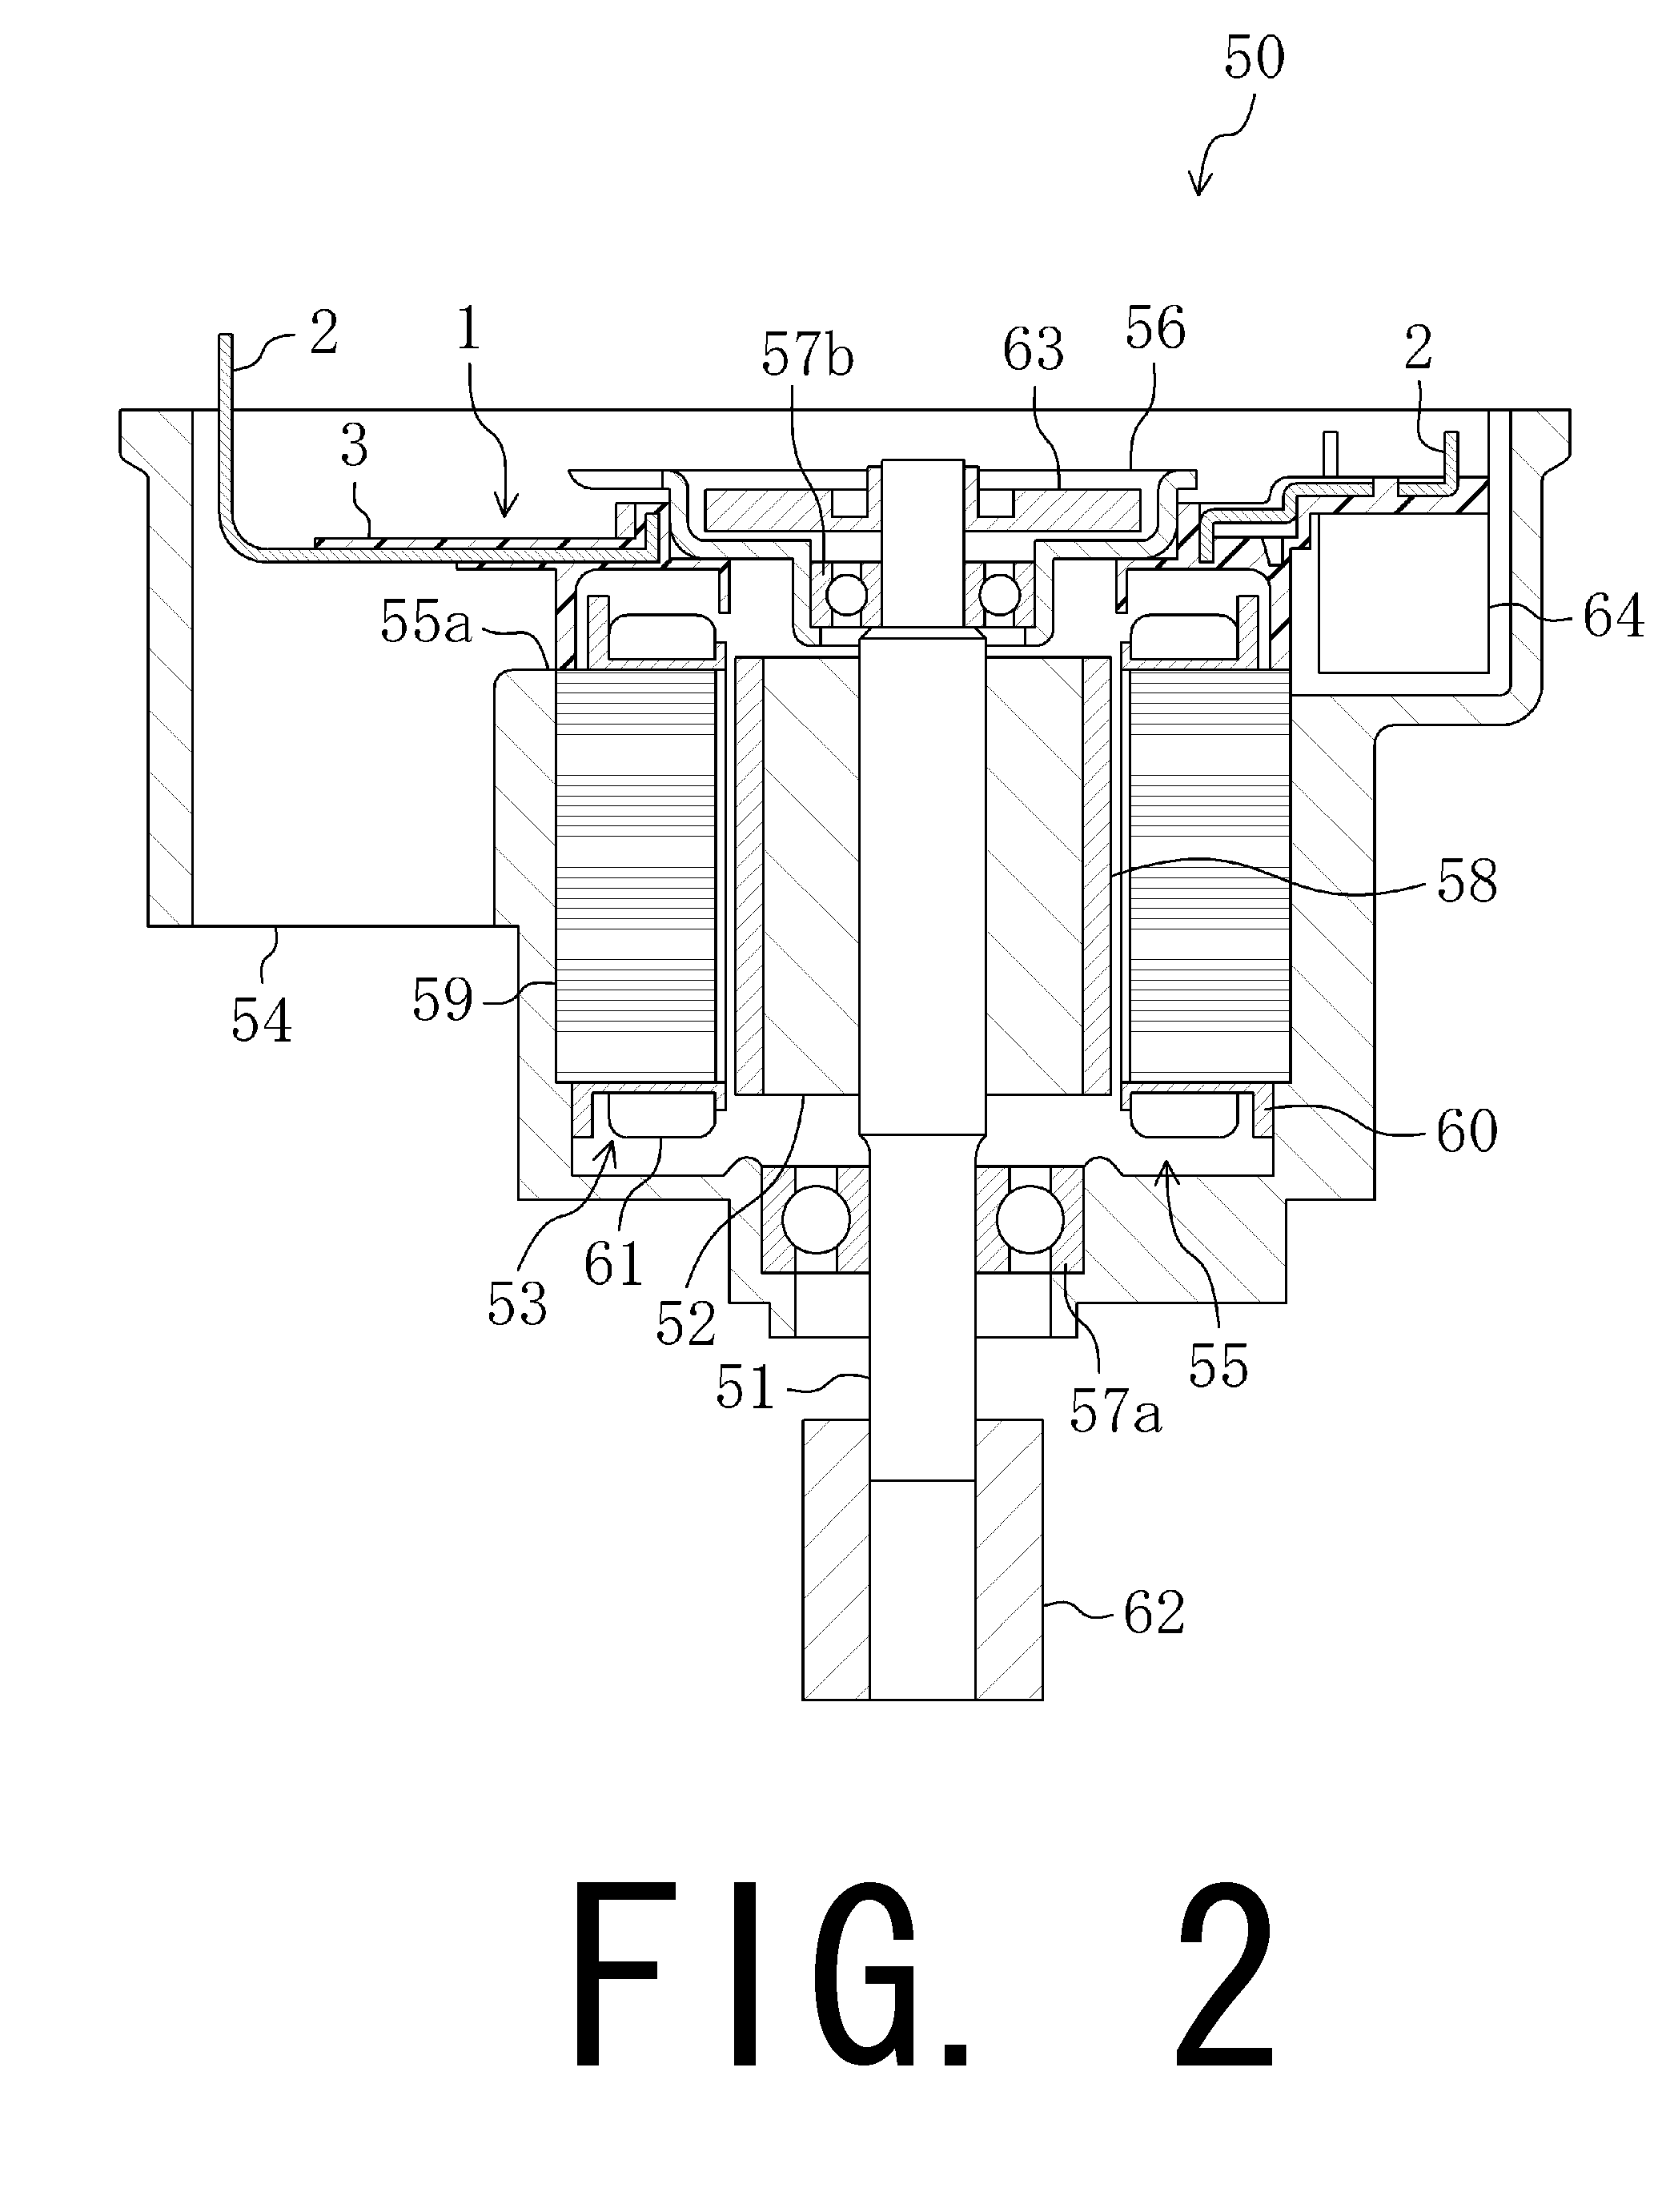 Busbar unit, motor, and power steering apparatus